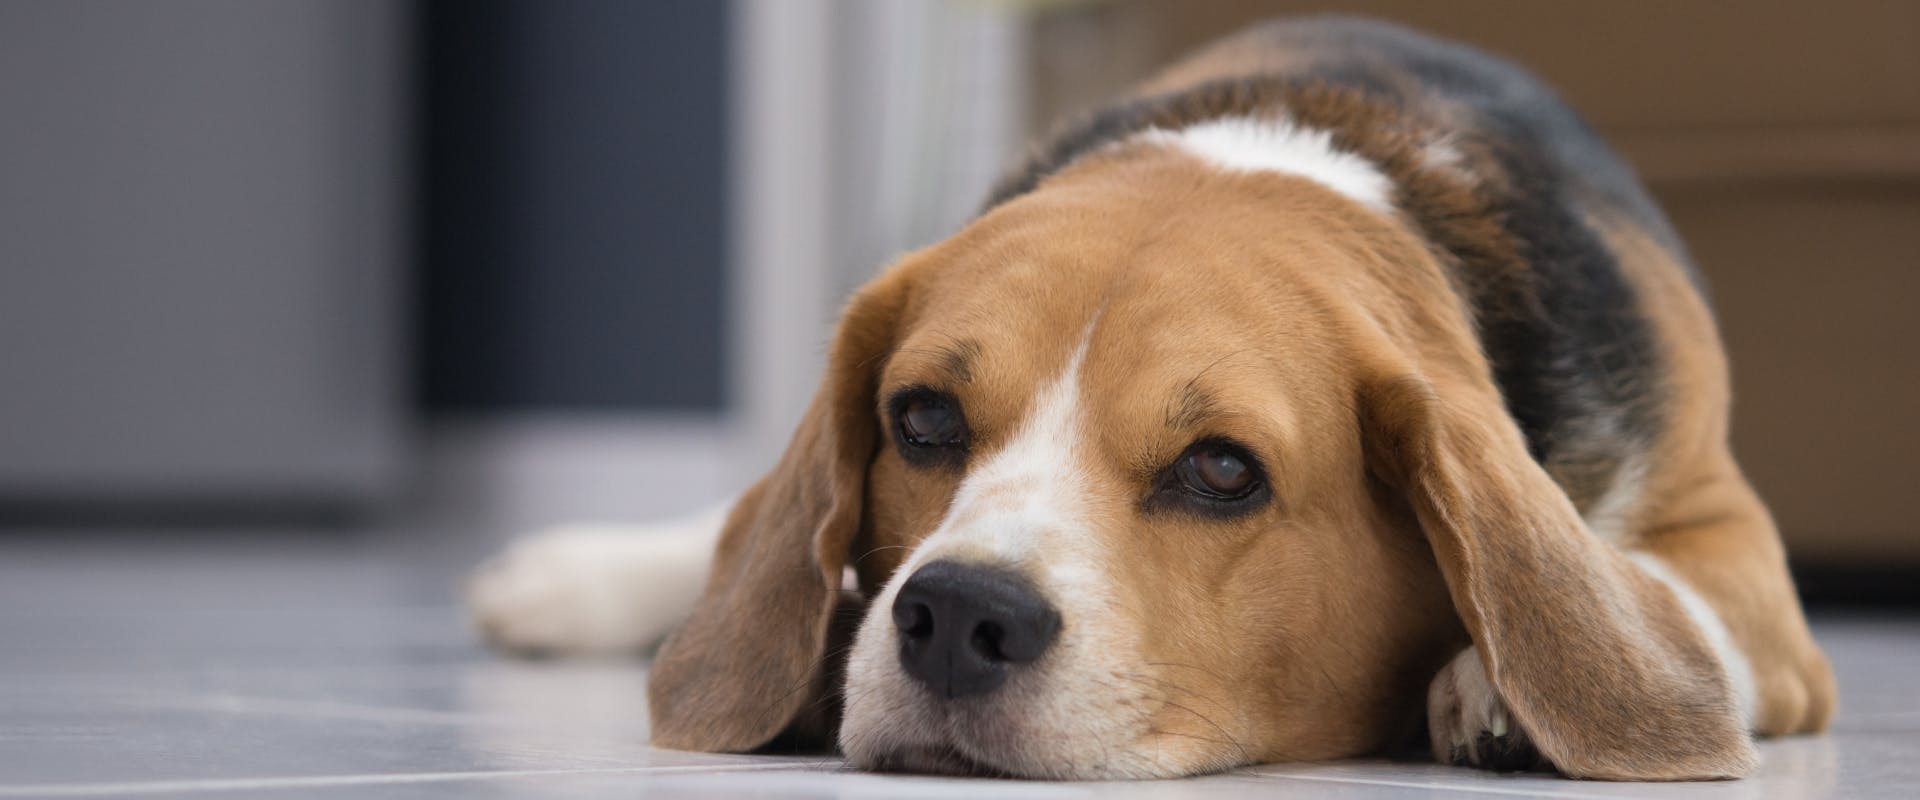 a beagle lying on the floor of a kitchen looking at the camera